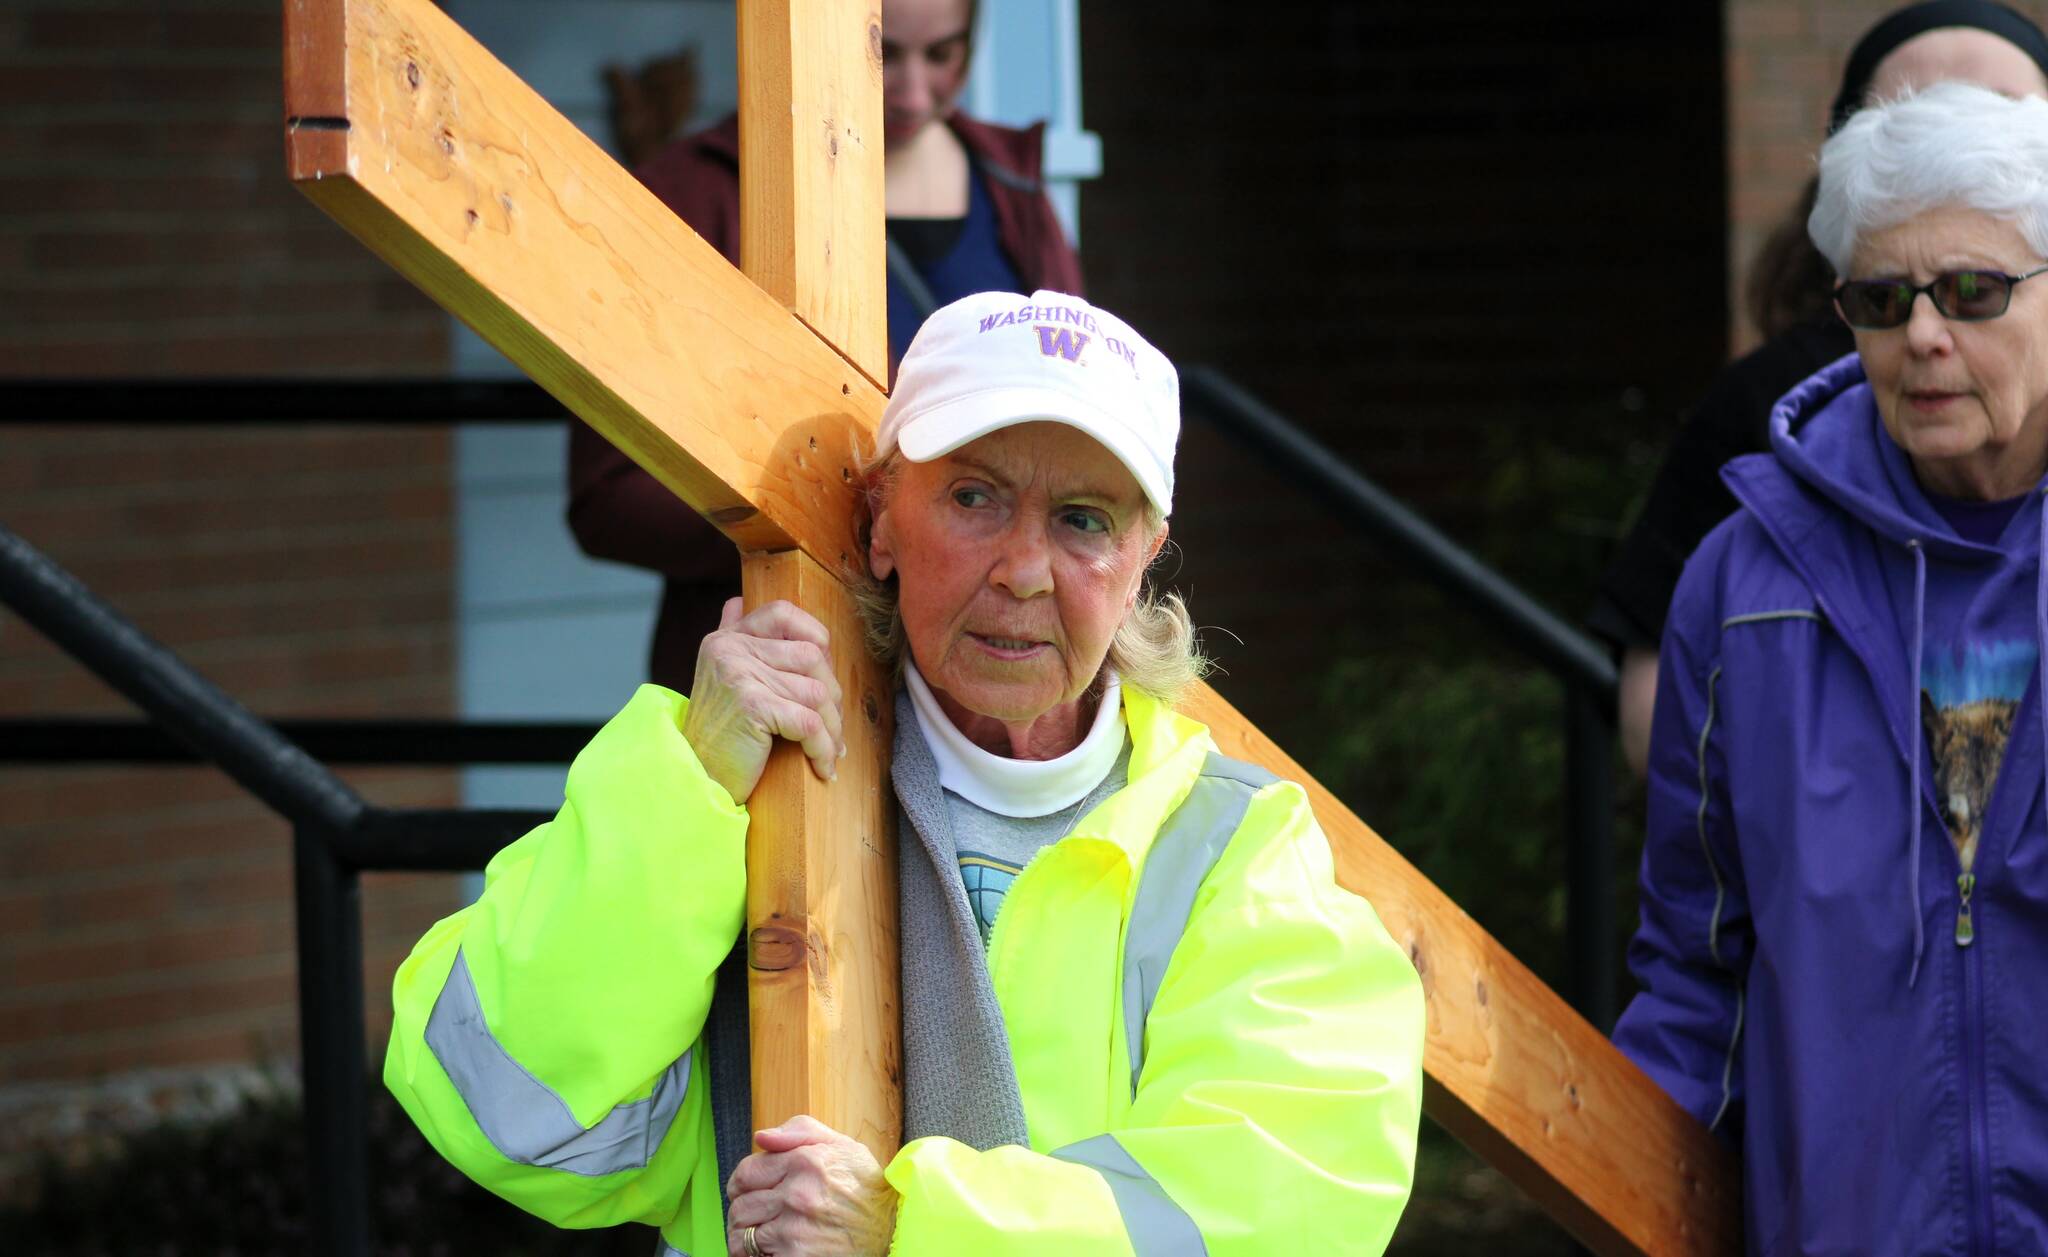 Elisha Meyer/Kitsap News Group photos
Tina Holmes shoulders the weight of the cross for the first leg of the 30th annual Cross Walk.